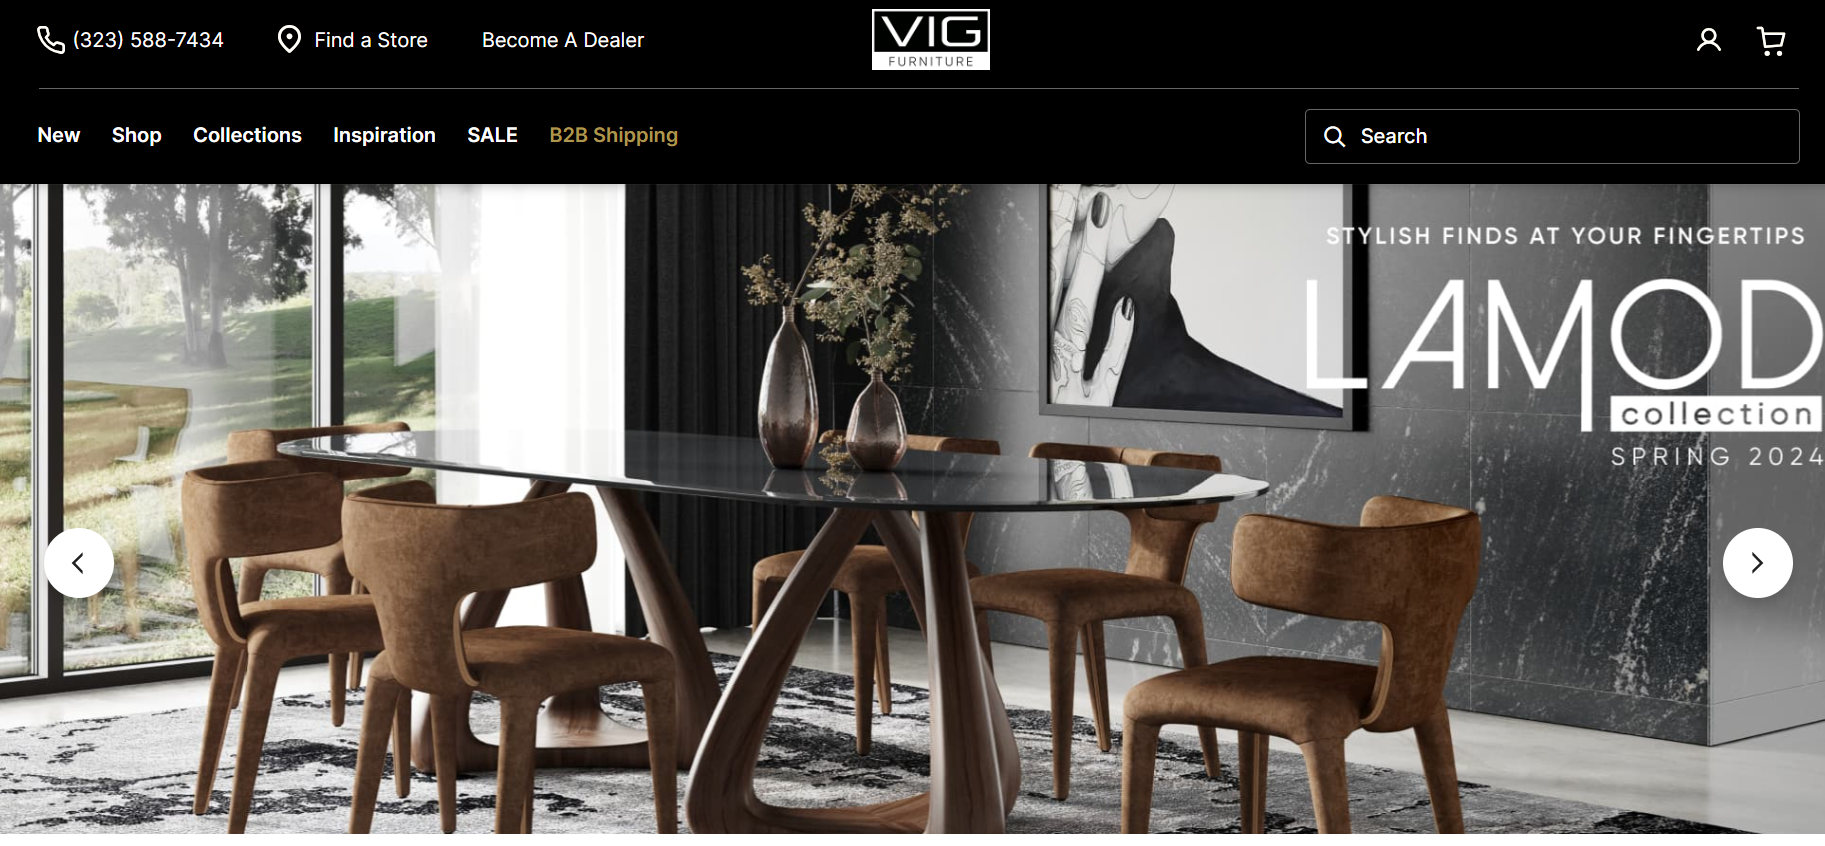 VIG Furniture, Inc. is a wholesaler of fine home furnishings from around the world. We represent the best furniture manufacturers, many of them on an exclusive basis.